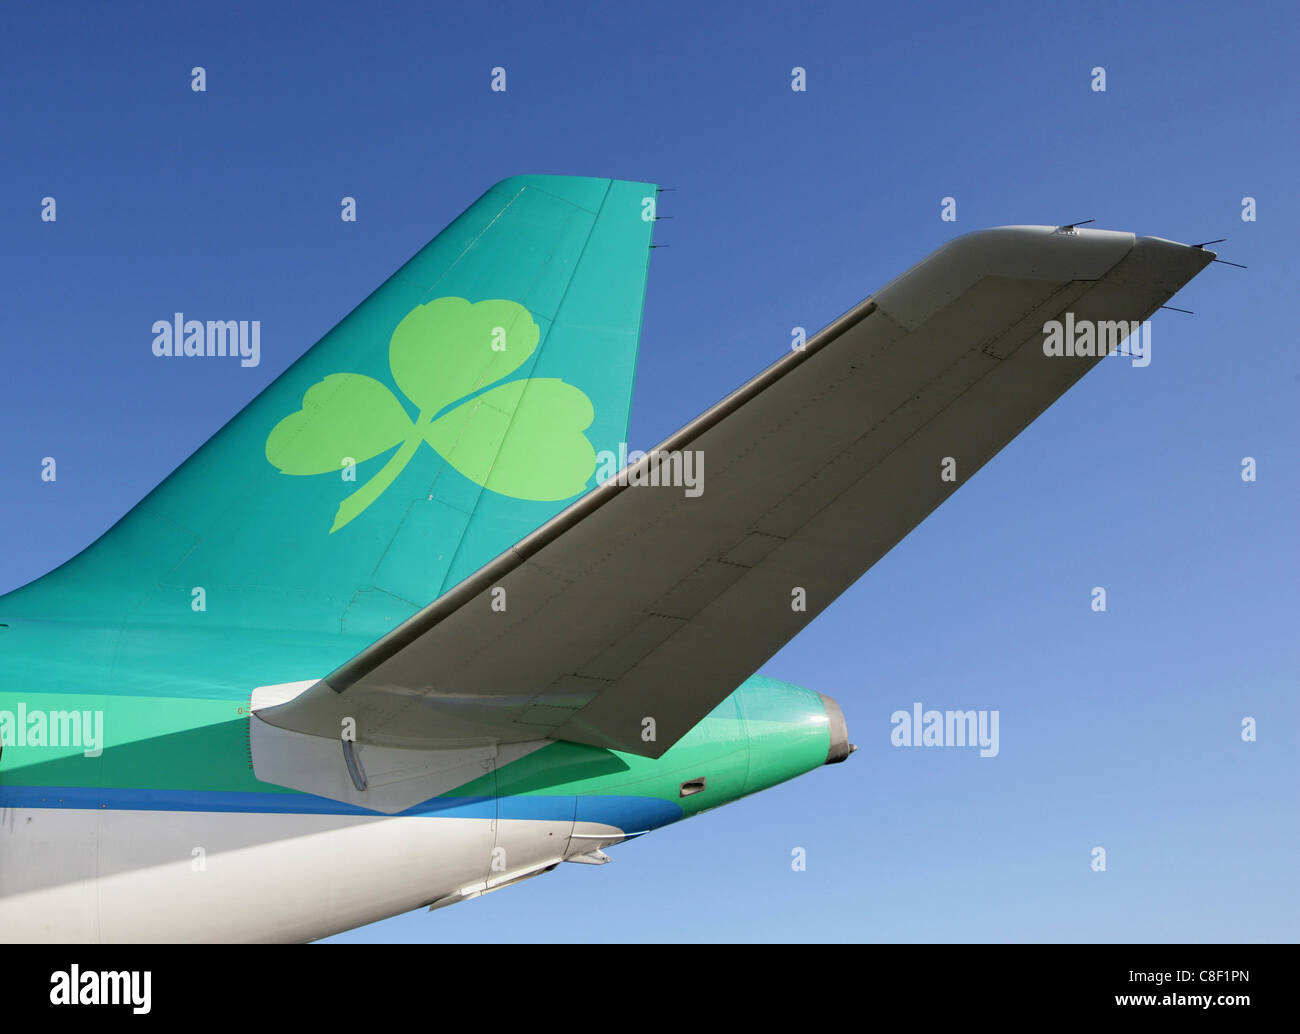 Plane tail of Irish airlines Aer Lingus Stock Photo